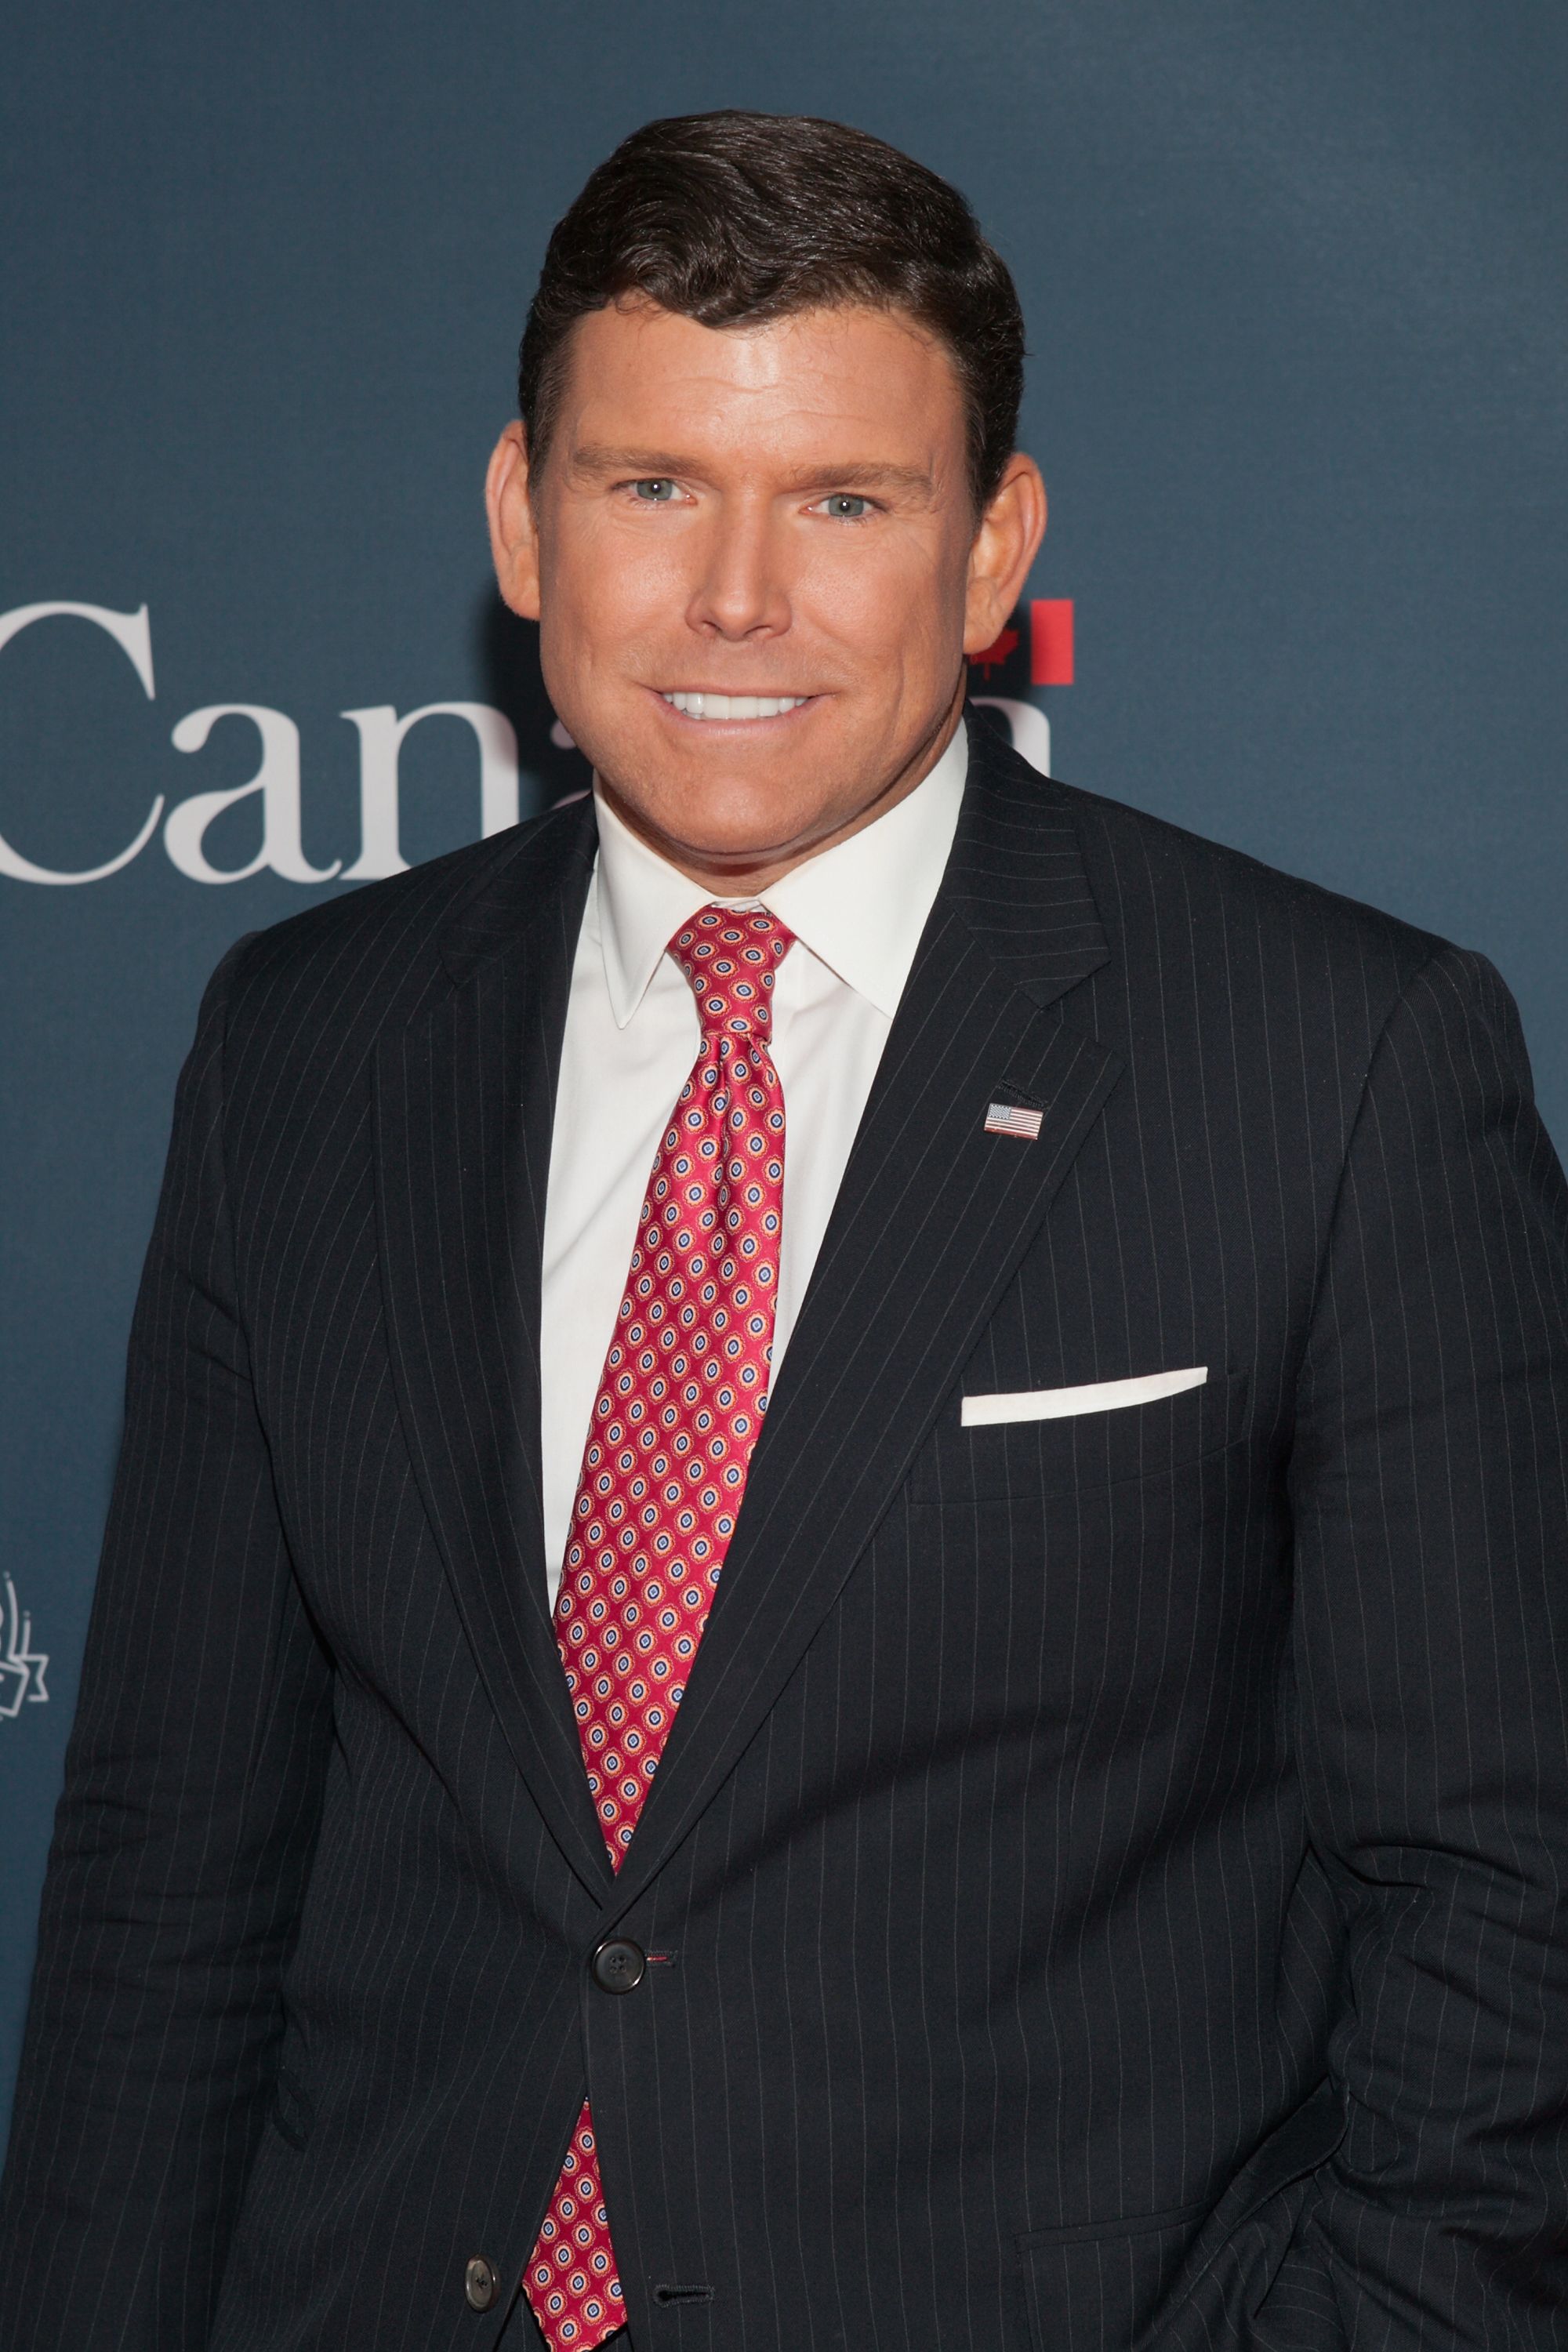 Bret Baier at The Hill's and Entertainment Tonight's celebration of the 100th White House Correspondents' Association Dinner weekend at the Embassy of Canada on May 2, 2014 | Photo: Getty Images